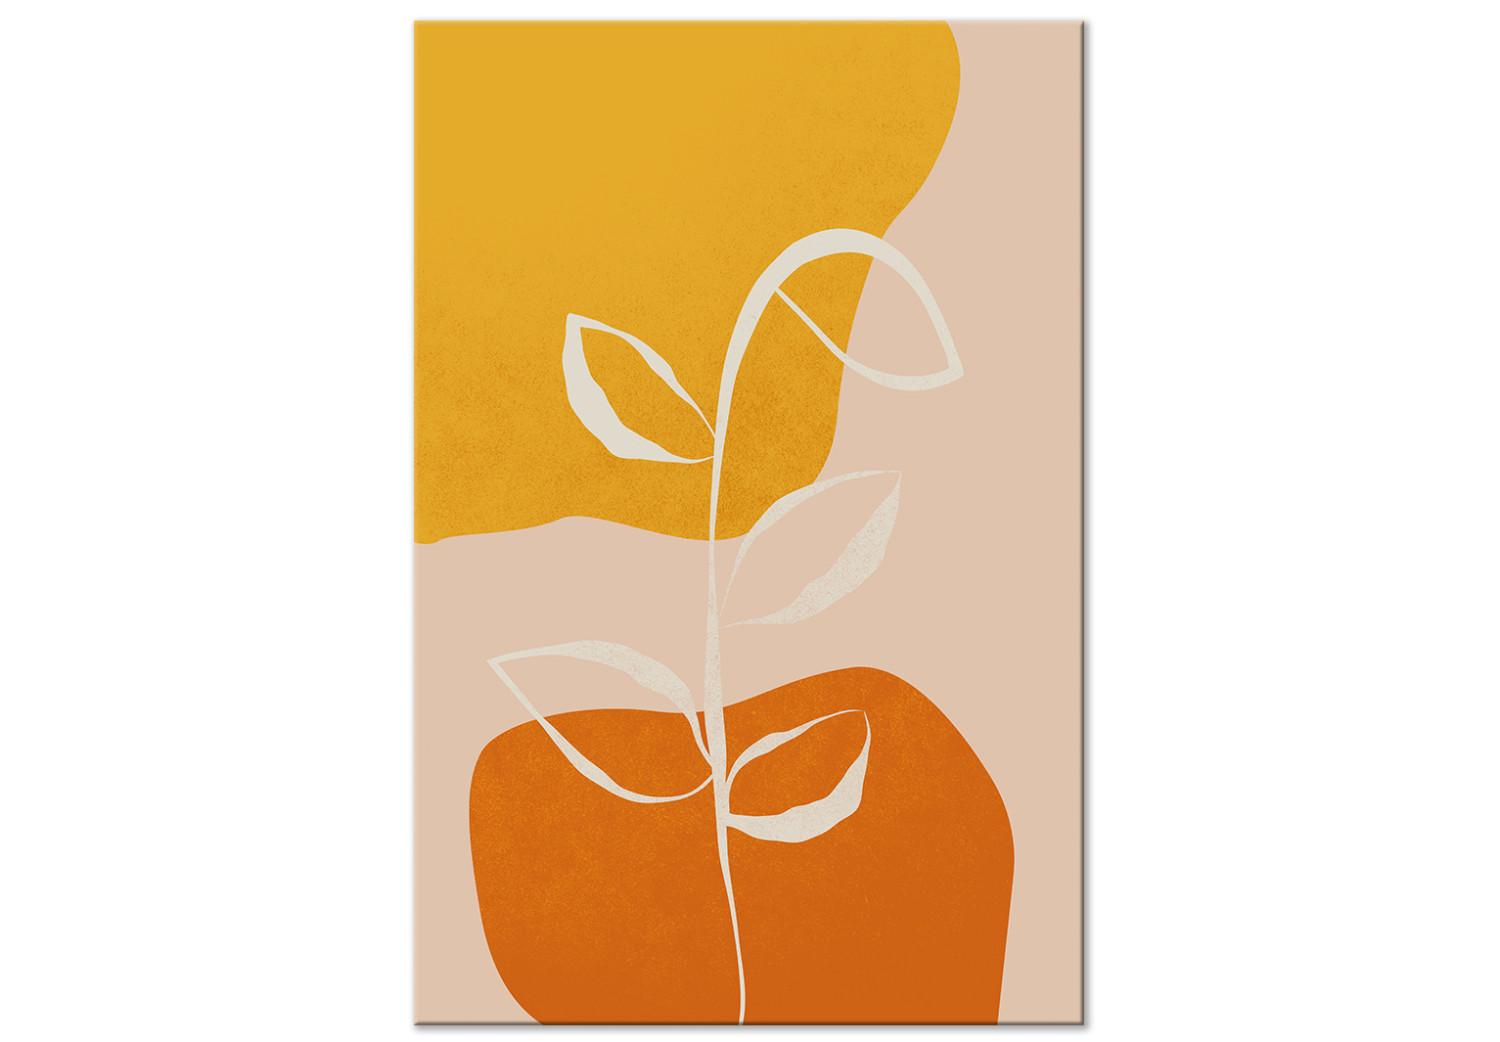 Canvas White twig - Abstract botanical motif in pastel colors